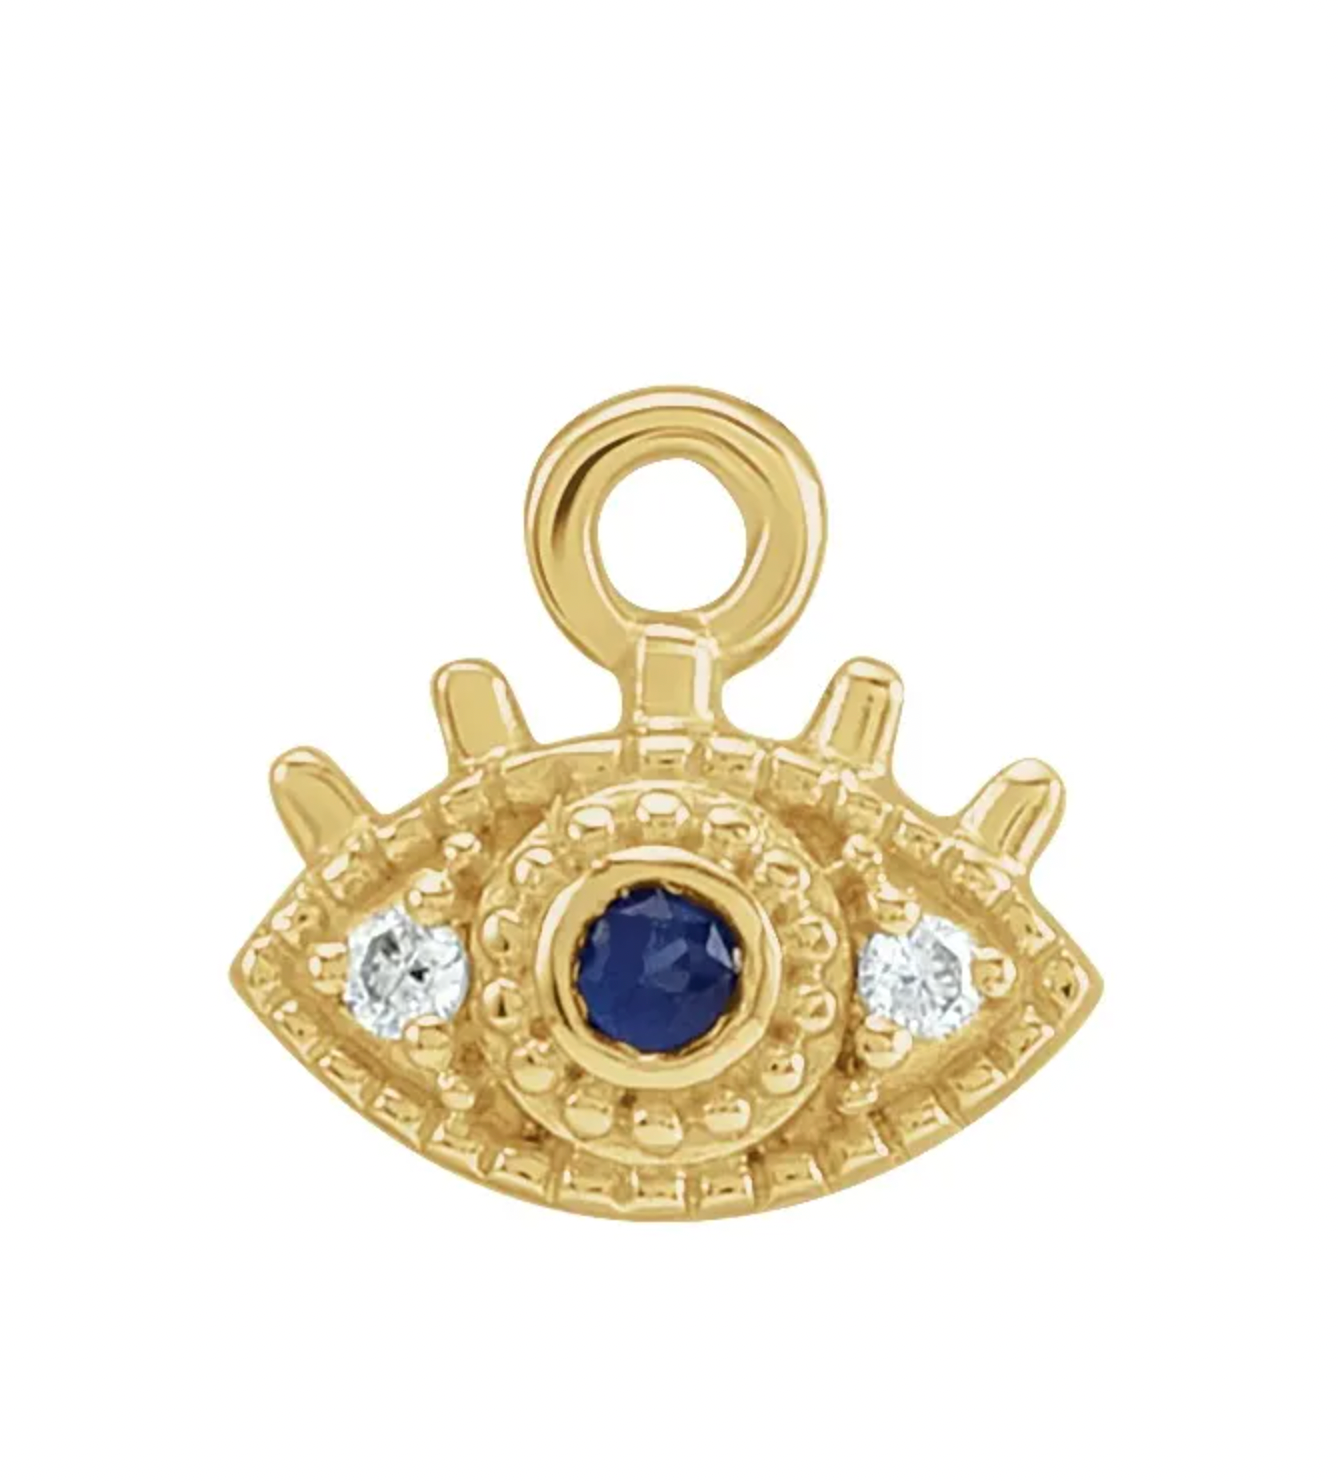 gold eye charm with sapphire in the center and diamonds on the sides